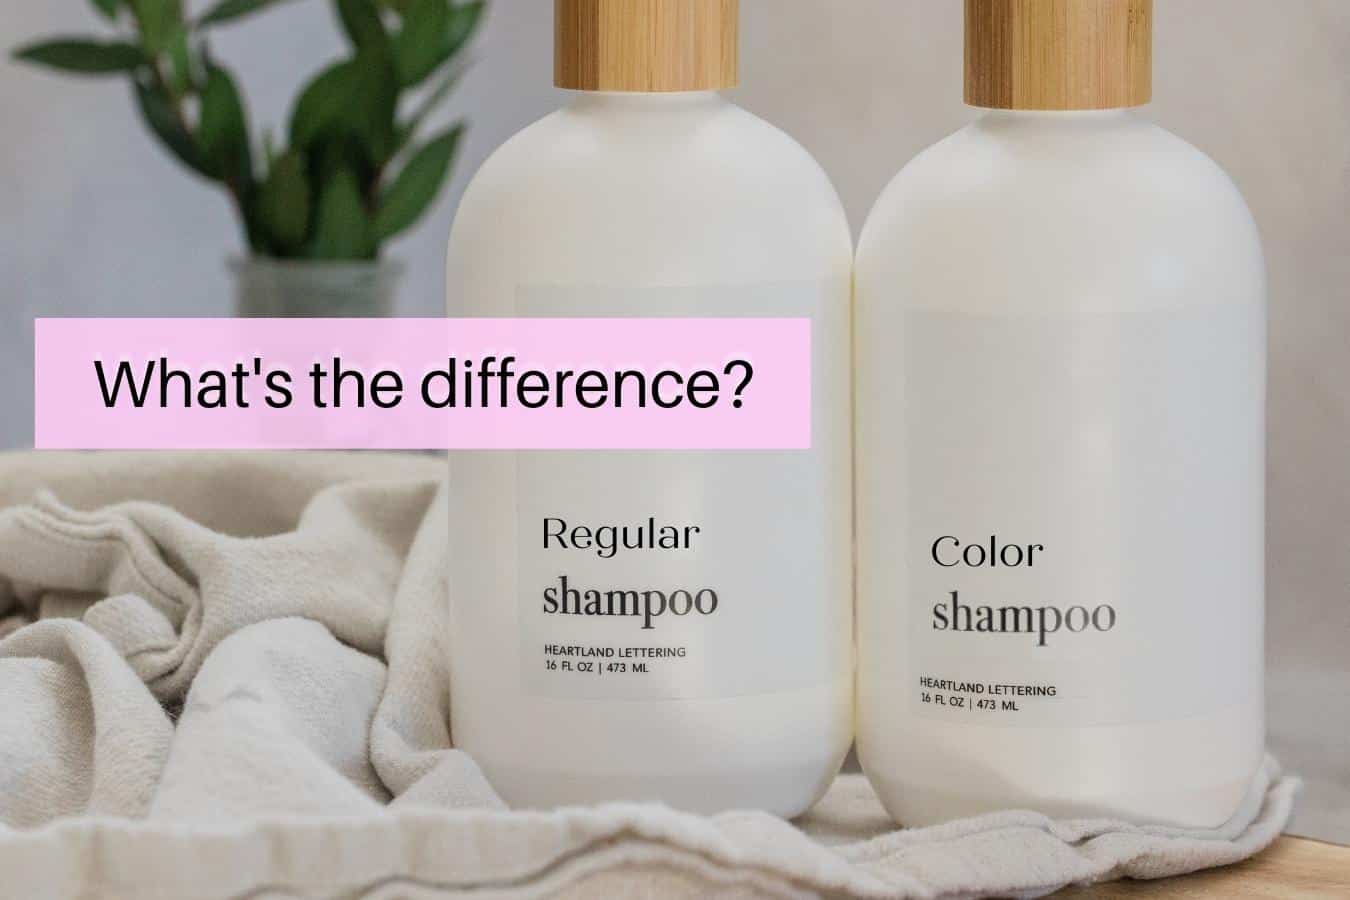 The Difference Between Regular Shampoo And Shampoo For Color-Treated Hair